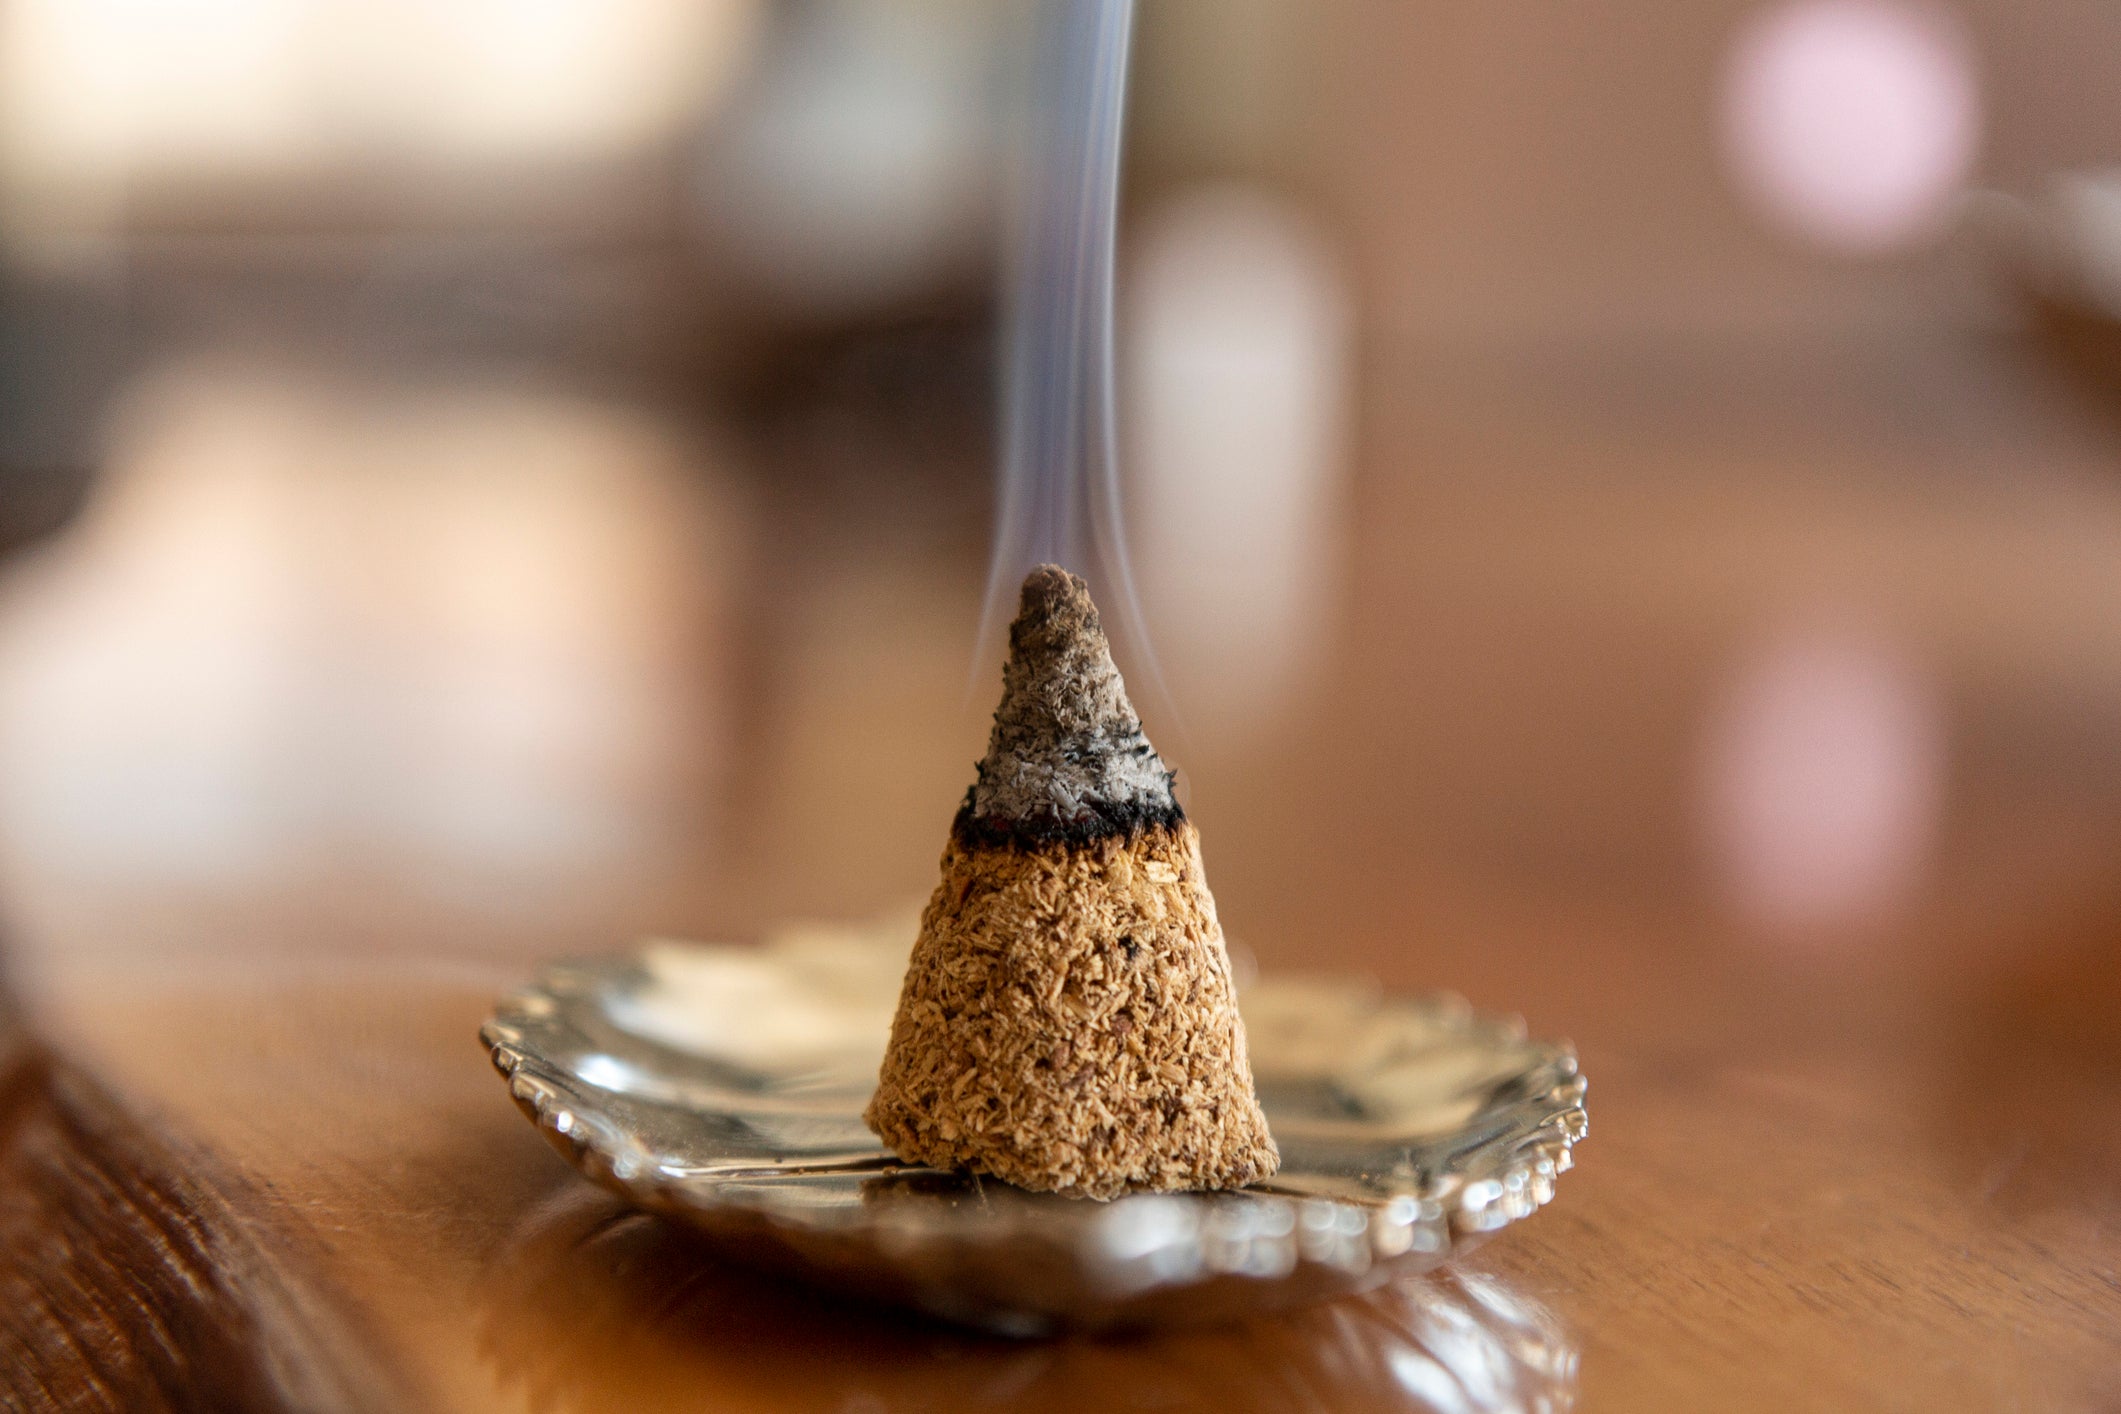 Within some cultures, incense plays a significant role in ceremonies and traditions